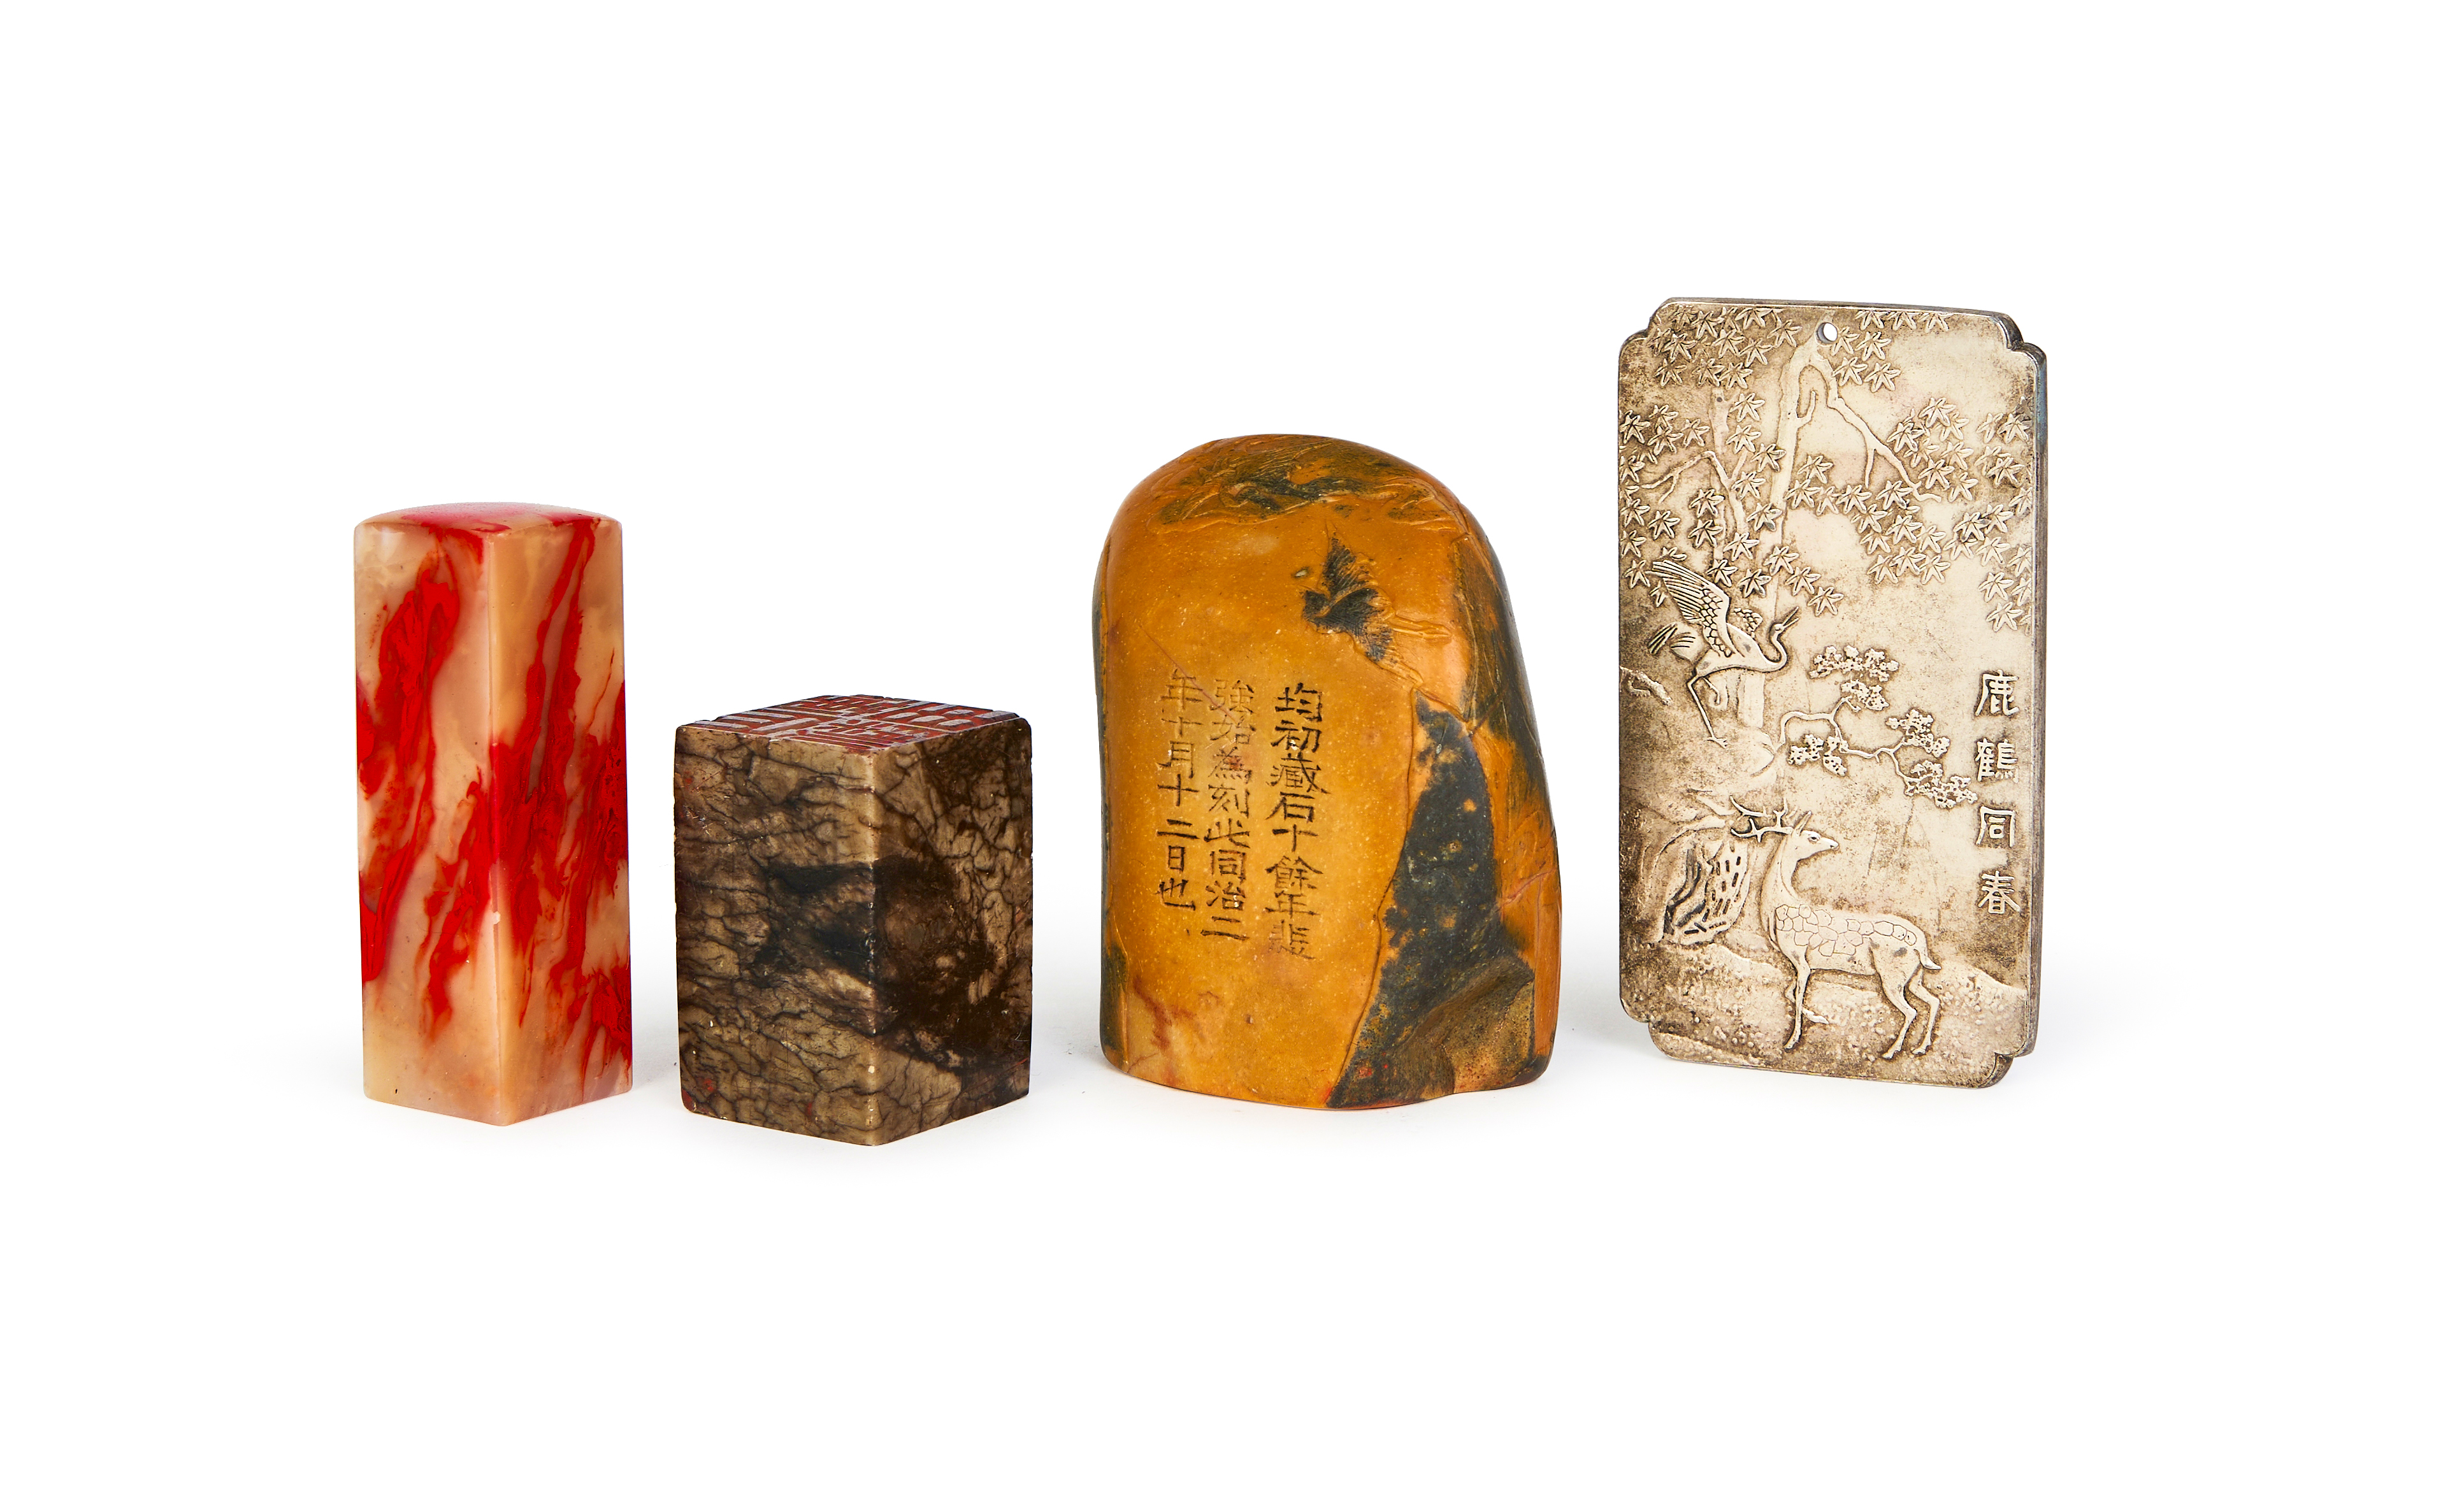 THREE CHINESE HARDSTONE INSCRIBED SEALS & A WHITE METAL PLAQUE, QING DYNASTY (1644-1911)